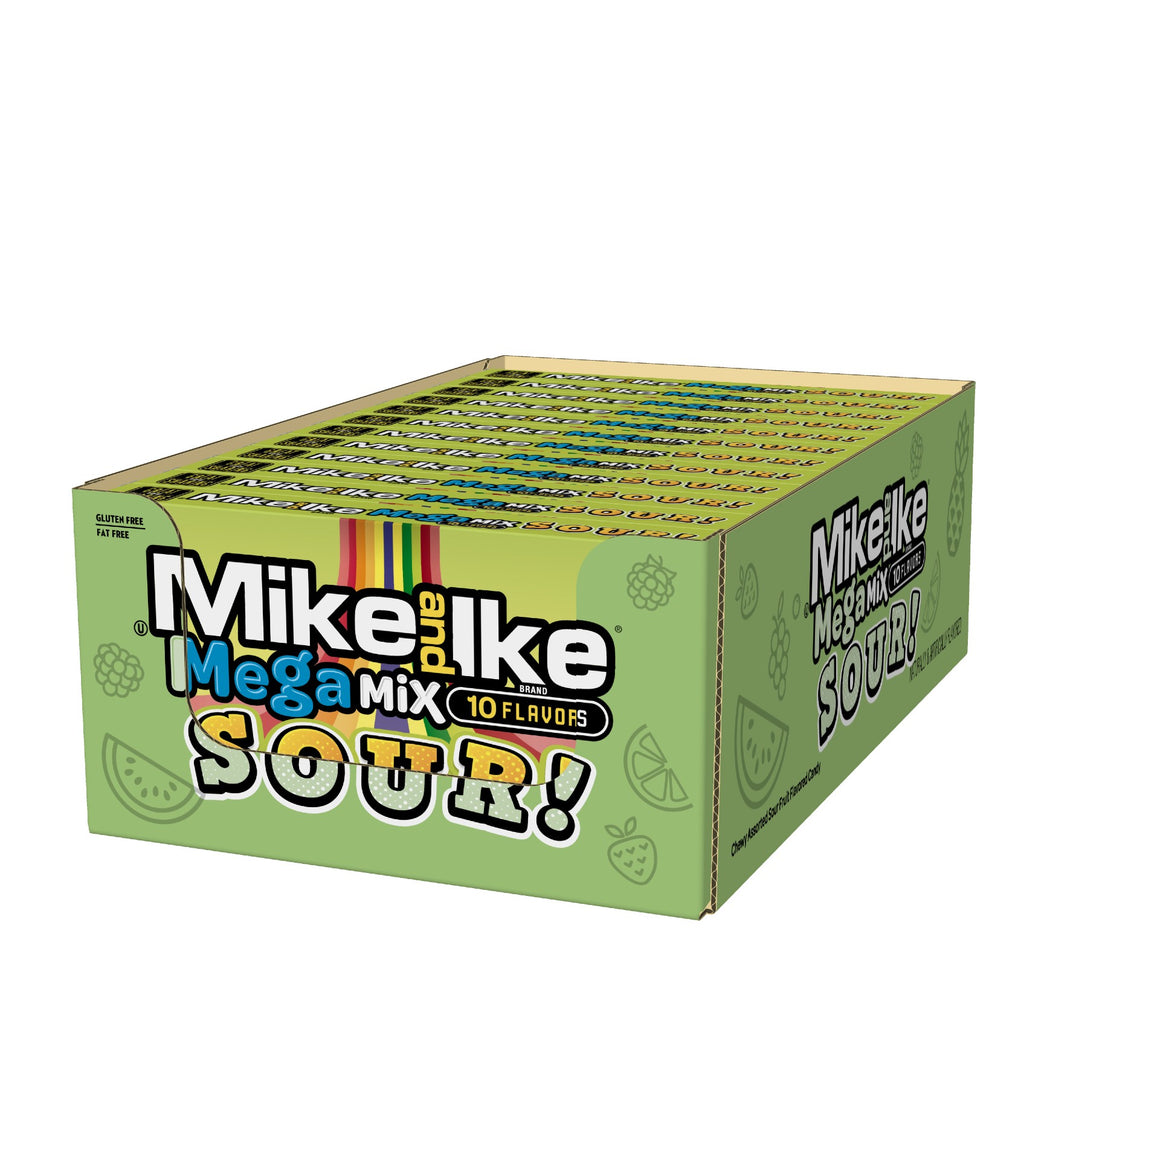 All City Candy Mike and Ike Mega Mix Sour Chewy Candies - 5-oz. Theater Box 1 Box Theater Boxes Just Born Inc For fresh candy and great service, visit www.allcitycandy.com